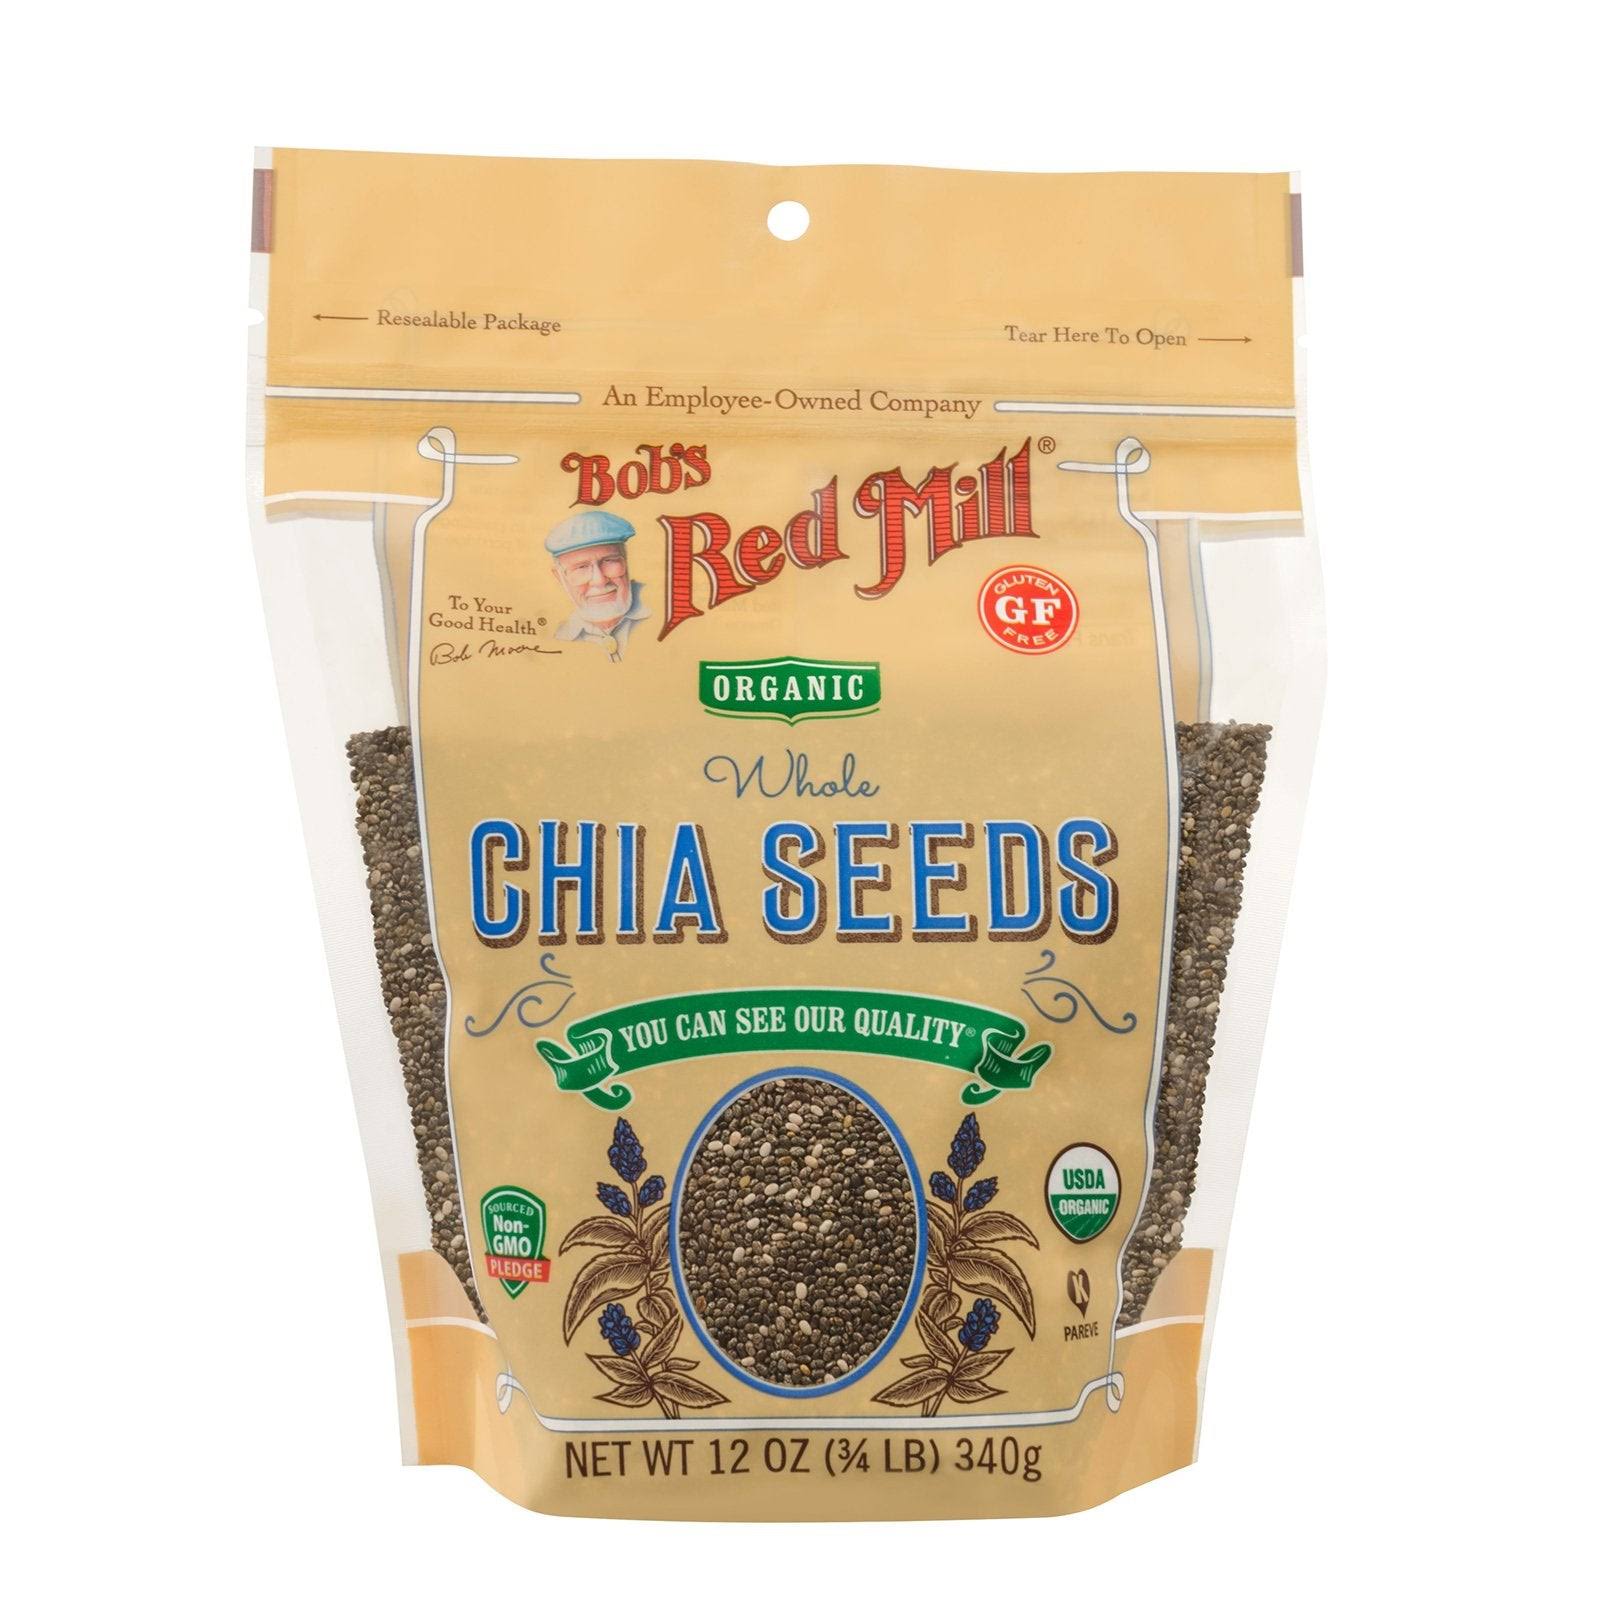 Bob's Red Mill Chia Seeds 340g